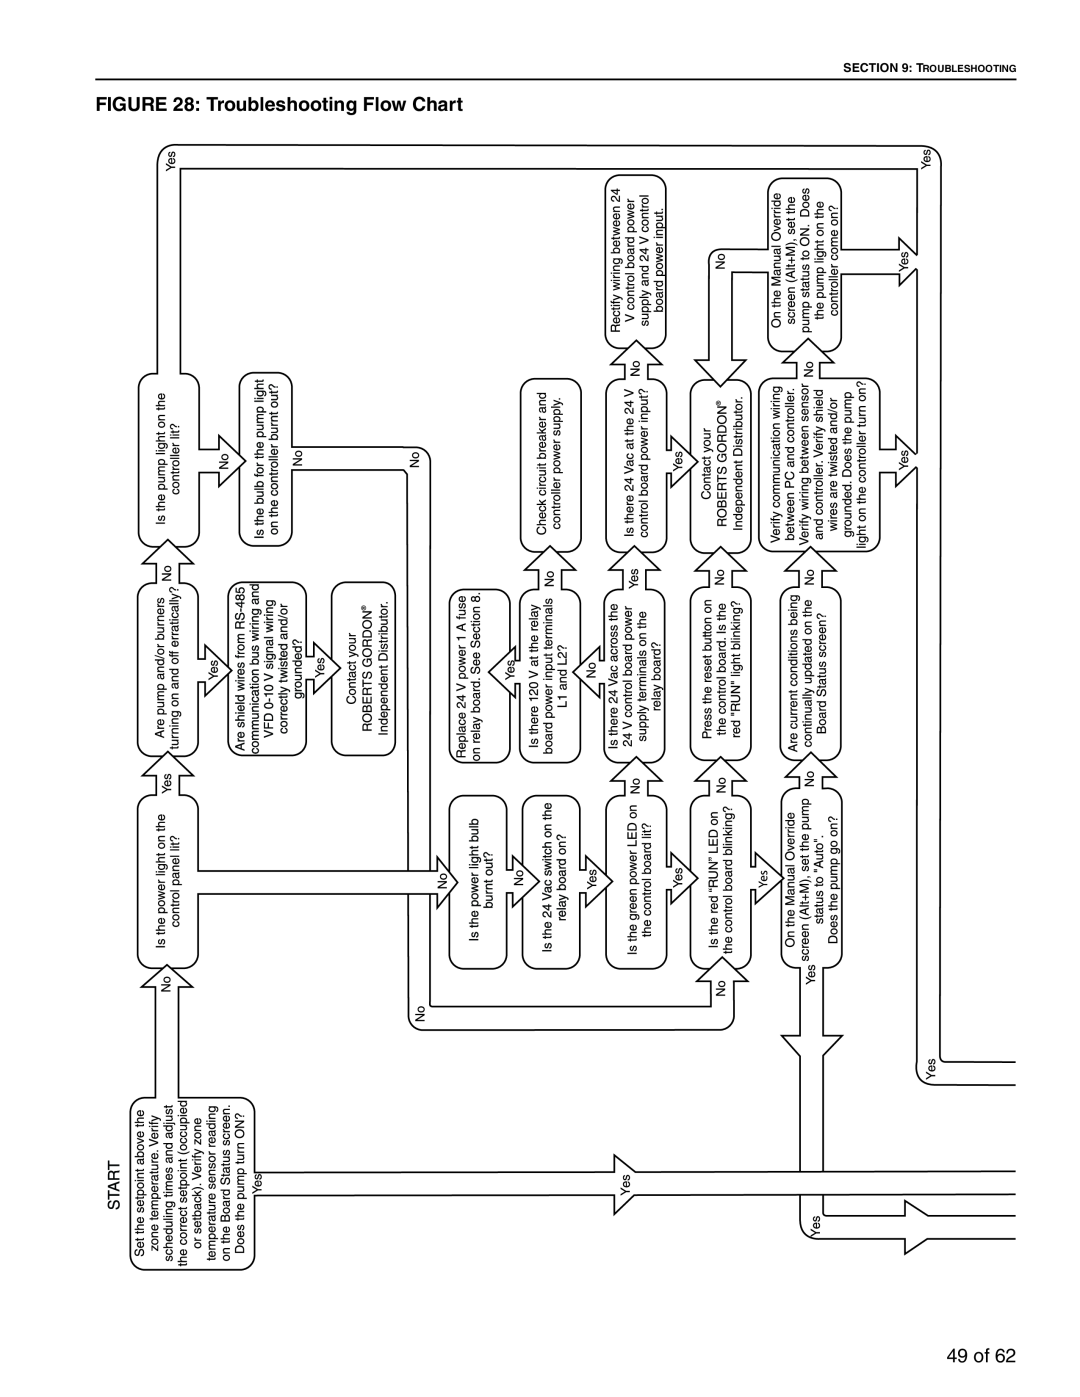 Roberts Gorden 10081601NA Rev H 12/11 service manual Troubleshooting Flow Chart, 49 of 